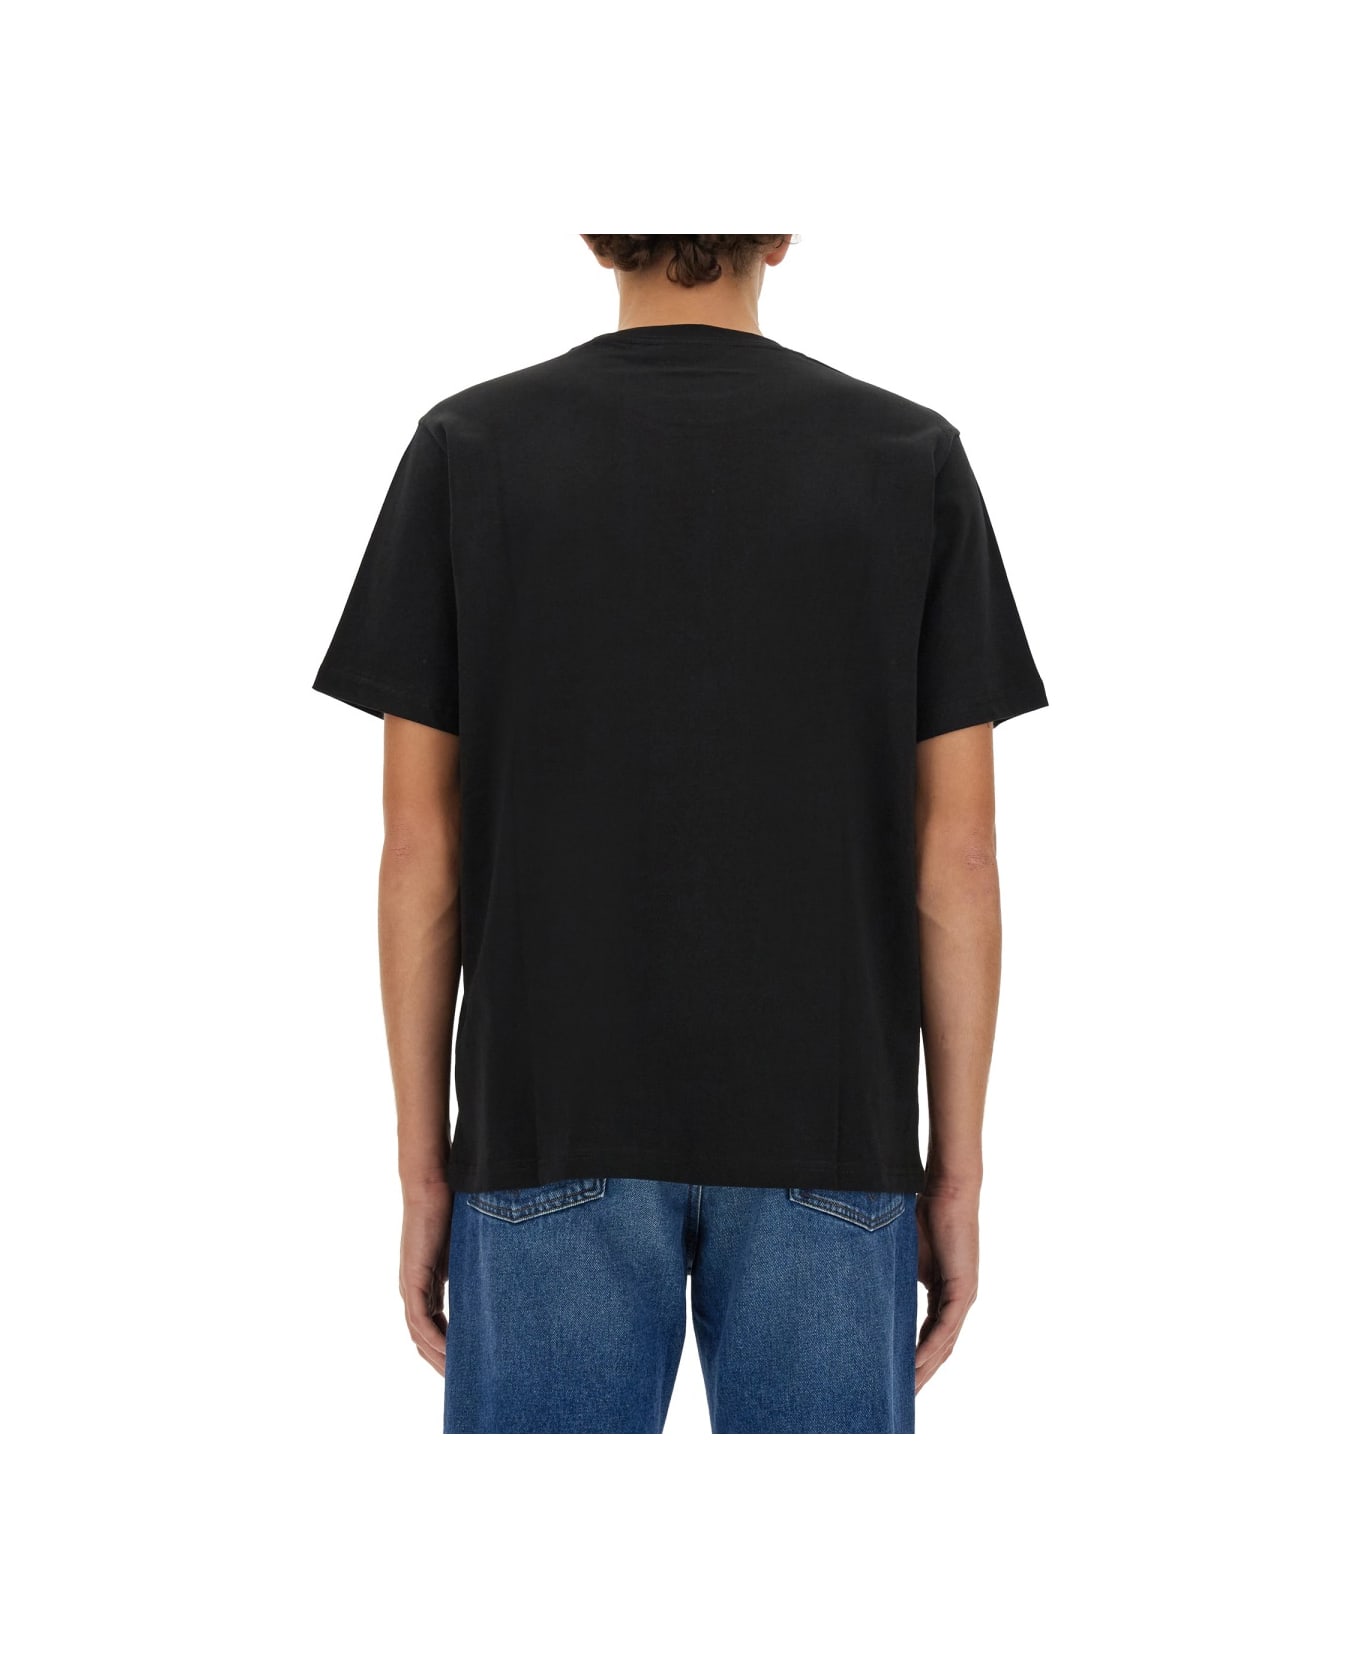 PS by Paul Smith "saturn" T-shirt - BLACK